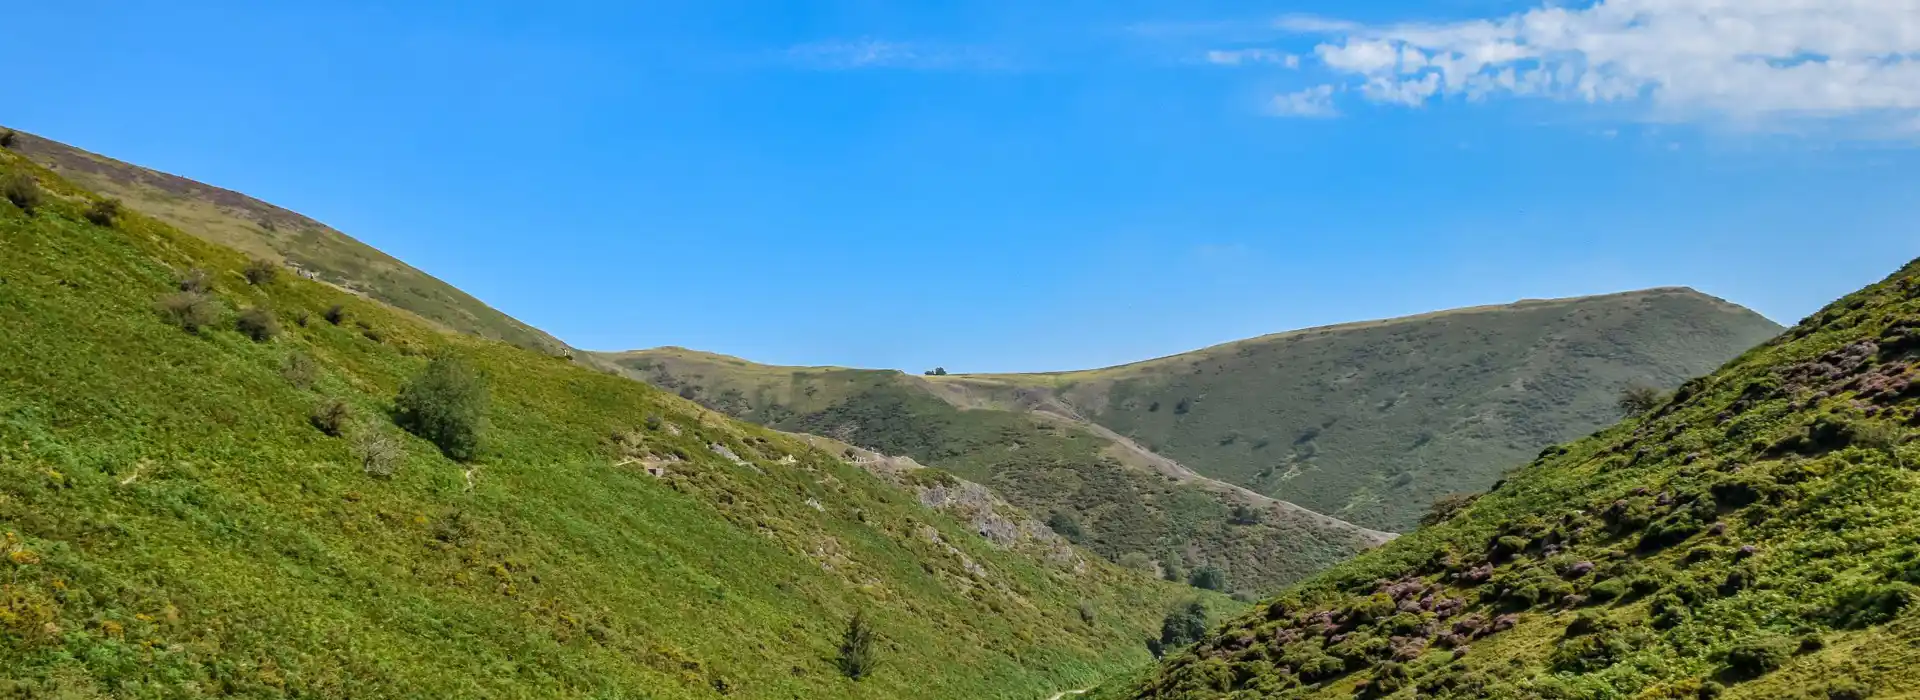 Campsites in the Shropshire Hills